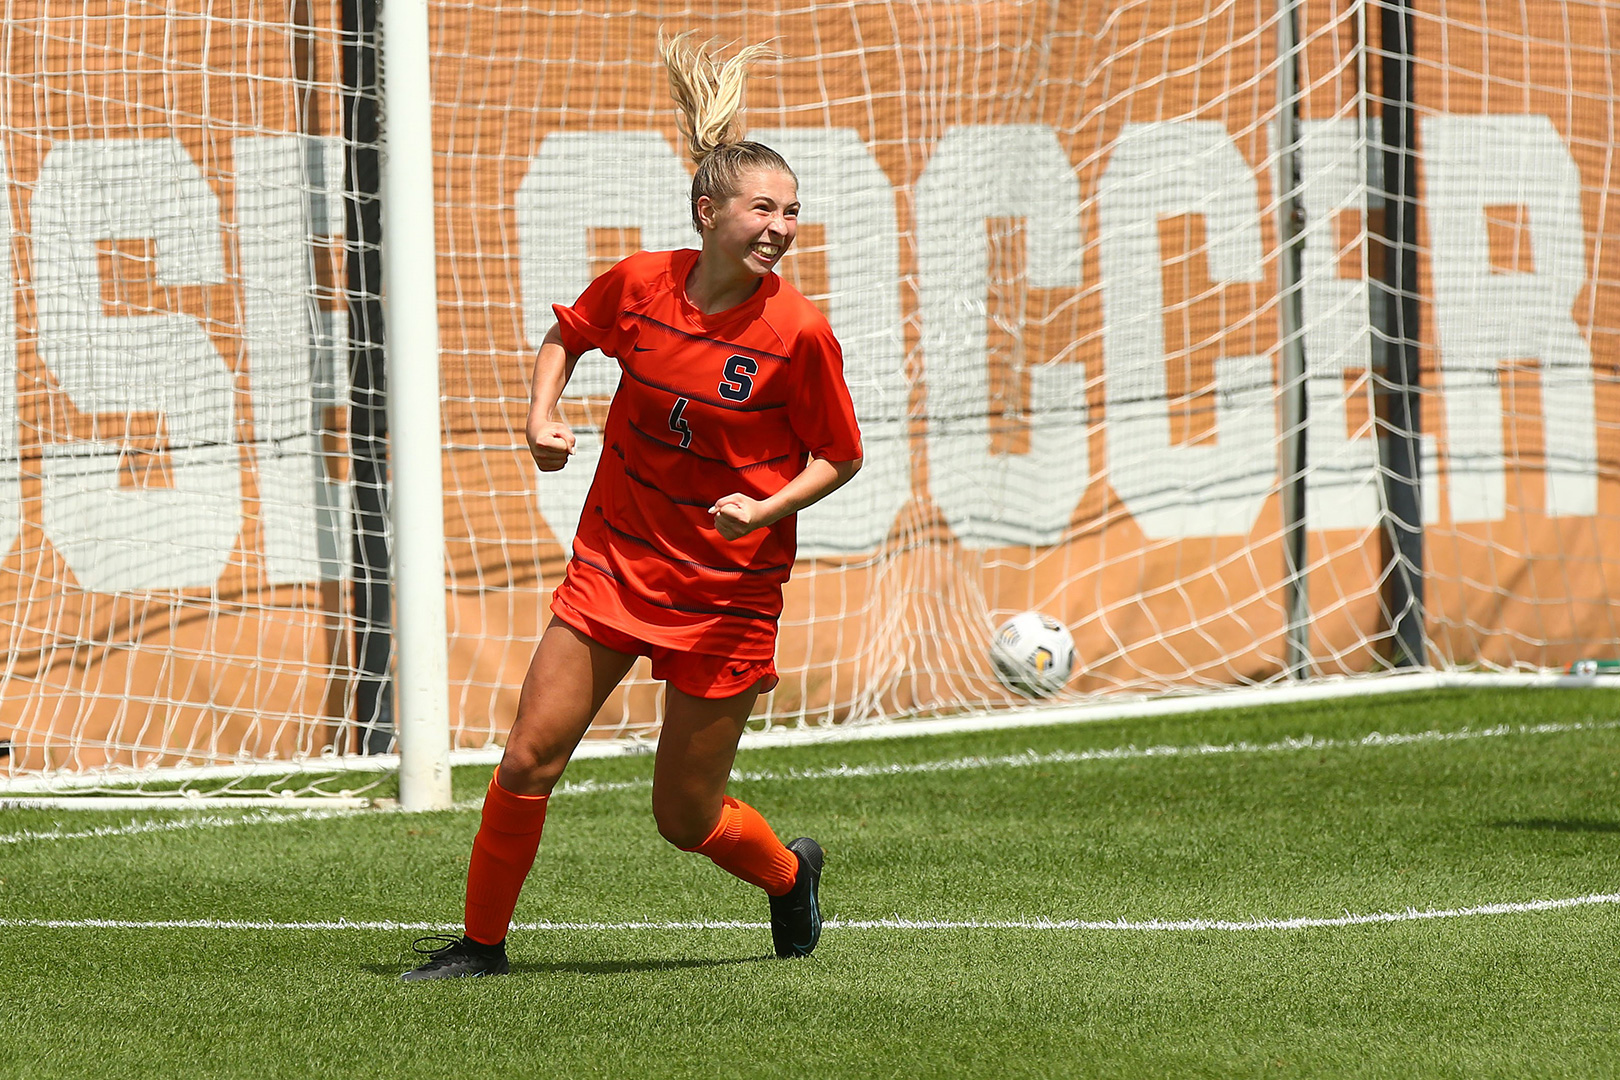 Syracuse Women's Soccer freshman Ashley Rauch celebrates after scoring a goal in the second half versus Fairleigh Dickinson on August 22, 2021.